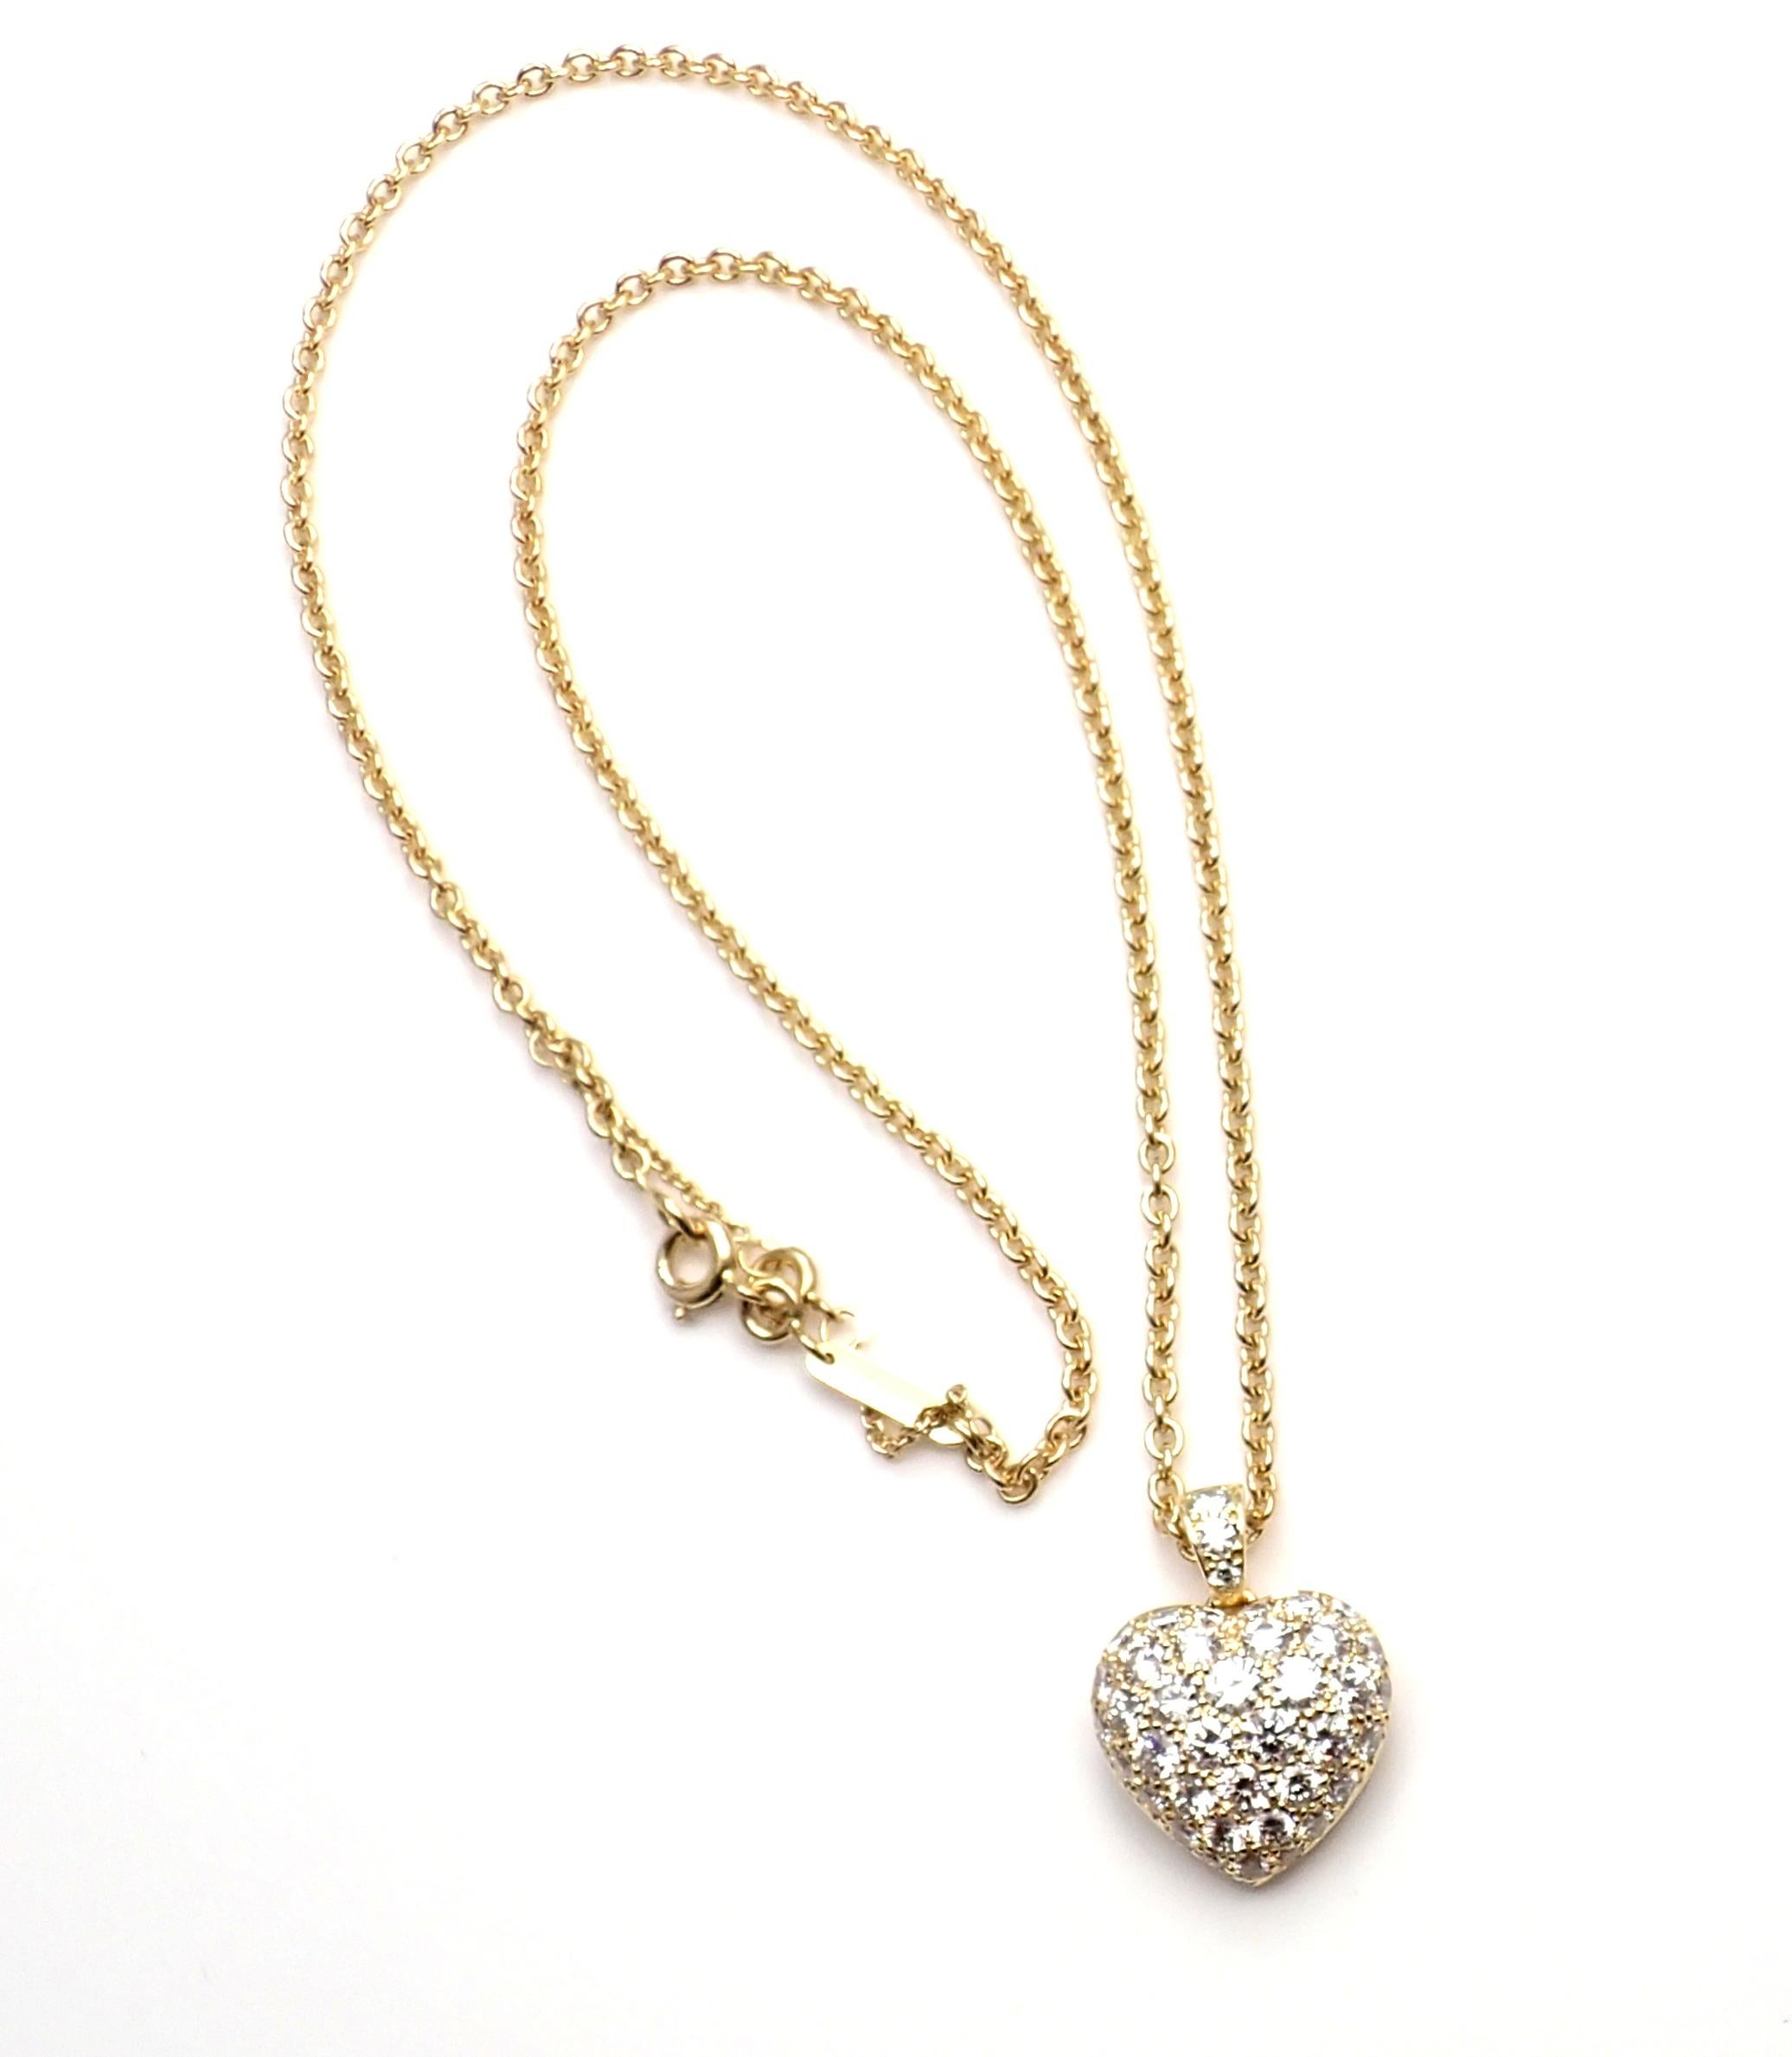 18k Yellow Gold Diamond Heart Pendant Necklace by Cartier. 
With Round brilliant cut diamonds VS1 clarity E color total weight approx. 1.40ct
Details: 
Chain: Width: 2mm
Length: 16.5